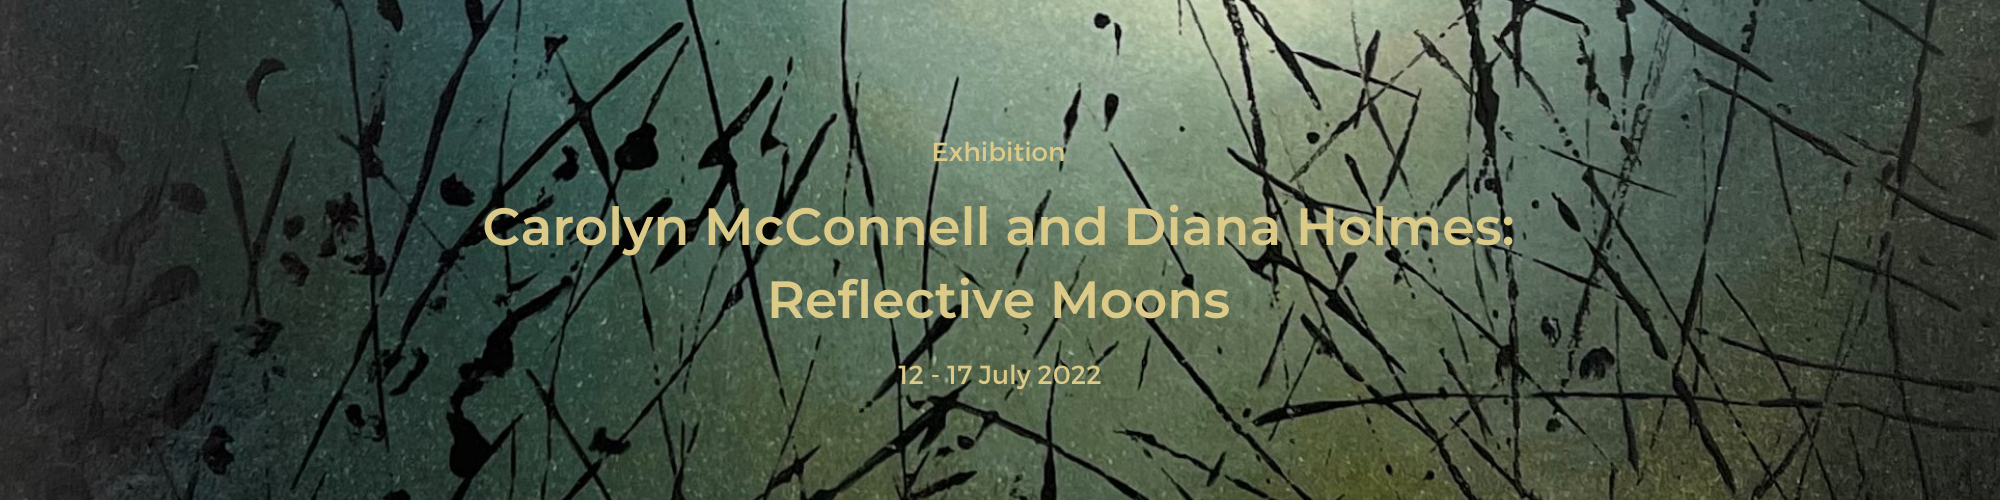 Carolyn McConnell & Diana Holmes: Reflective Moons